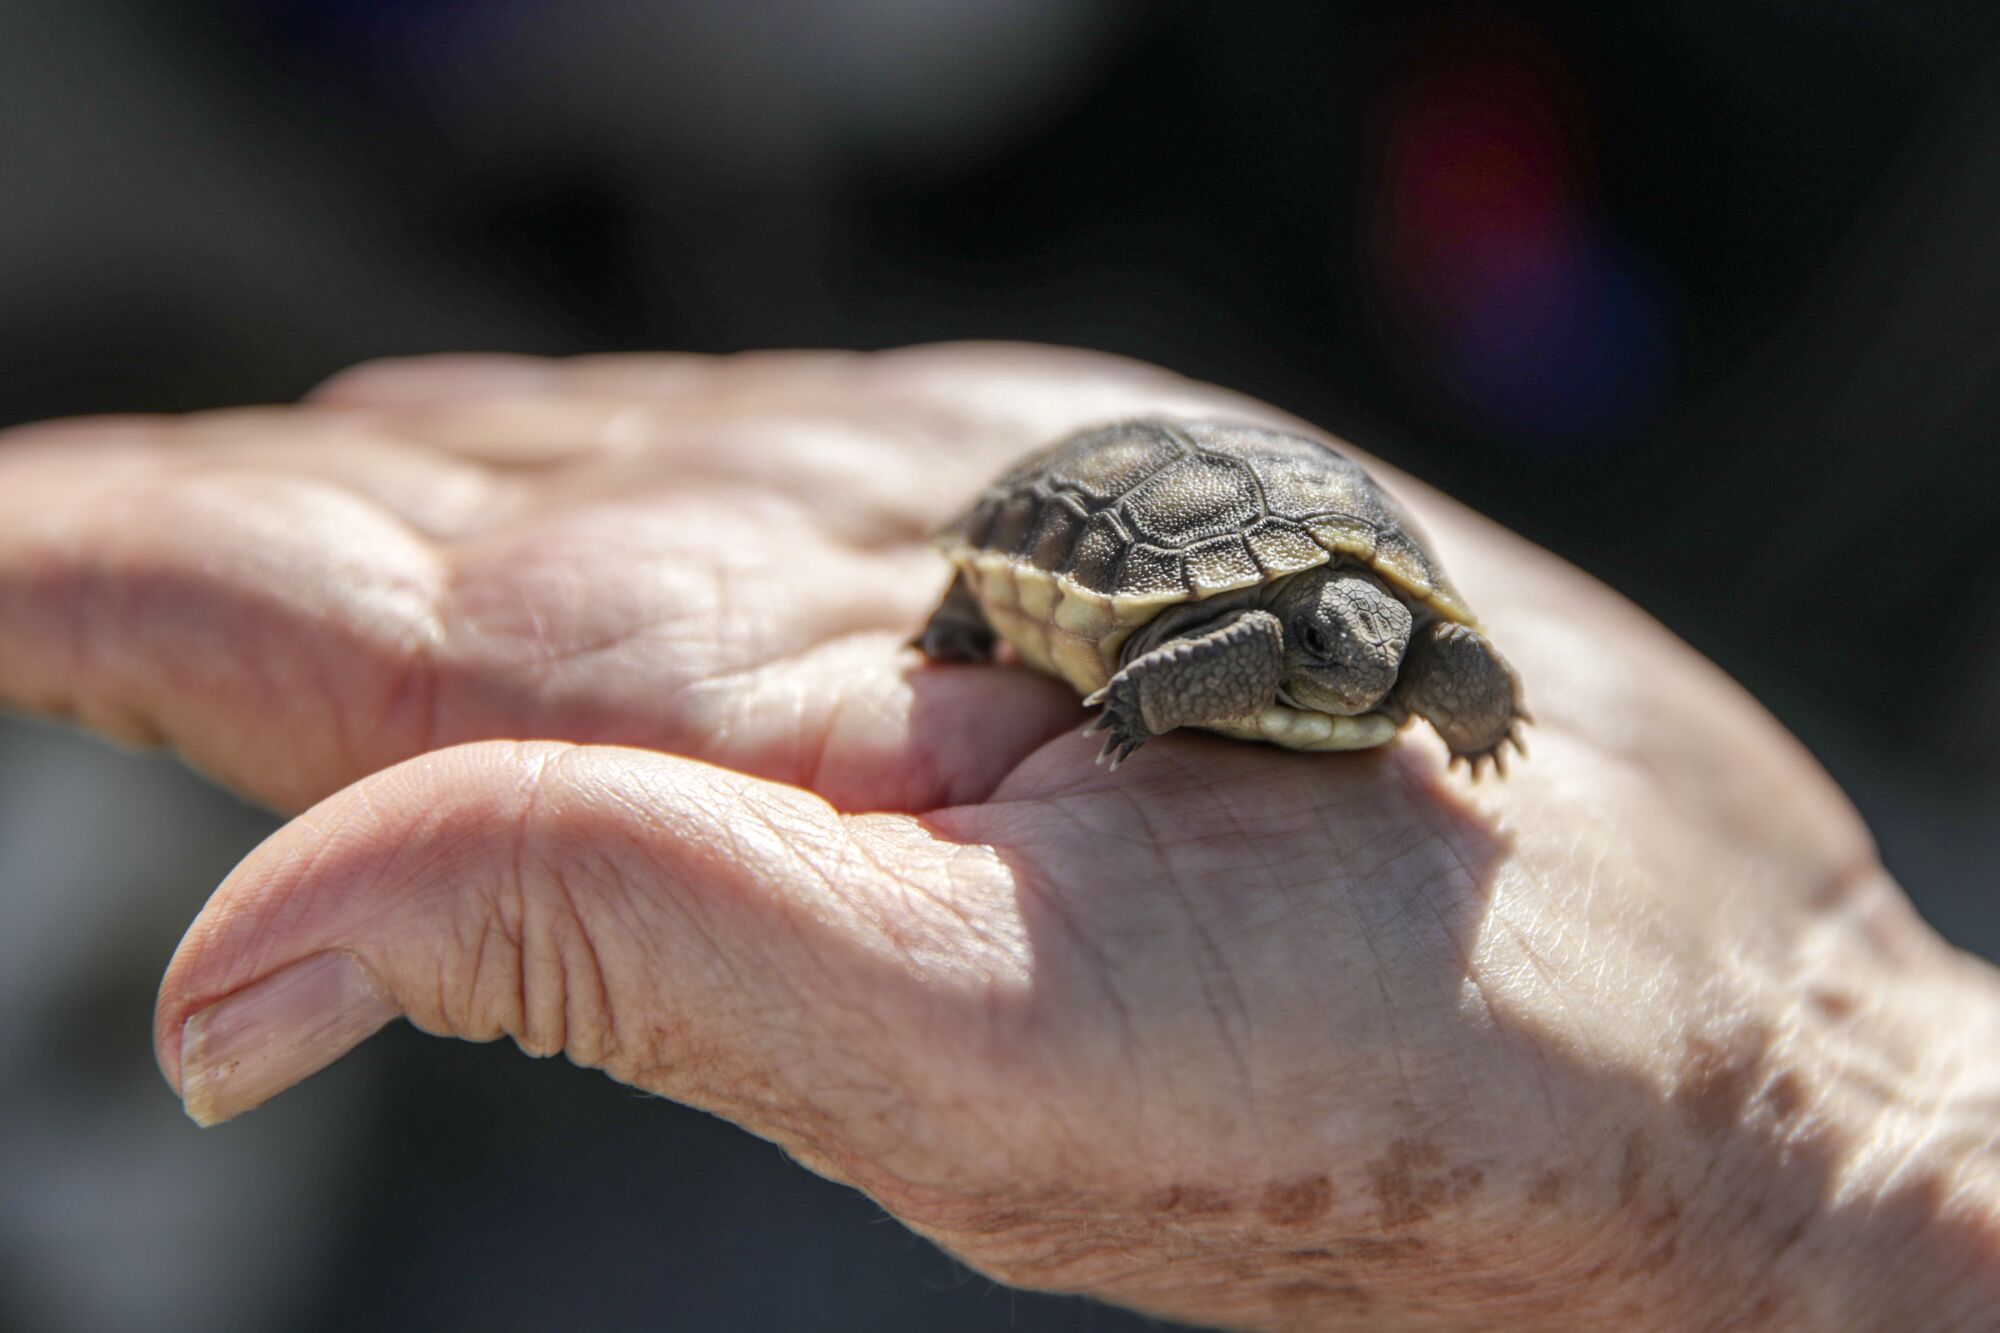 A desert tortoise hatchling rests in the palm of a hand.